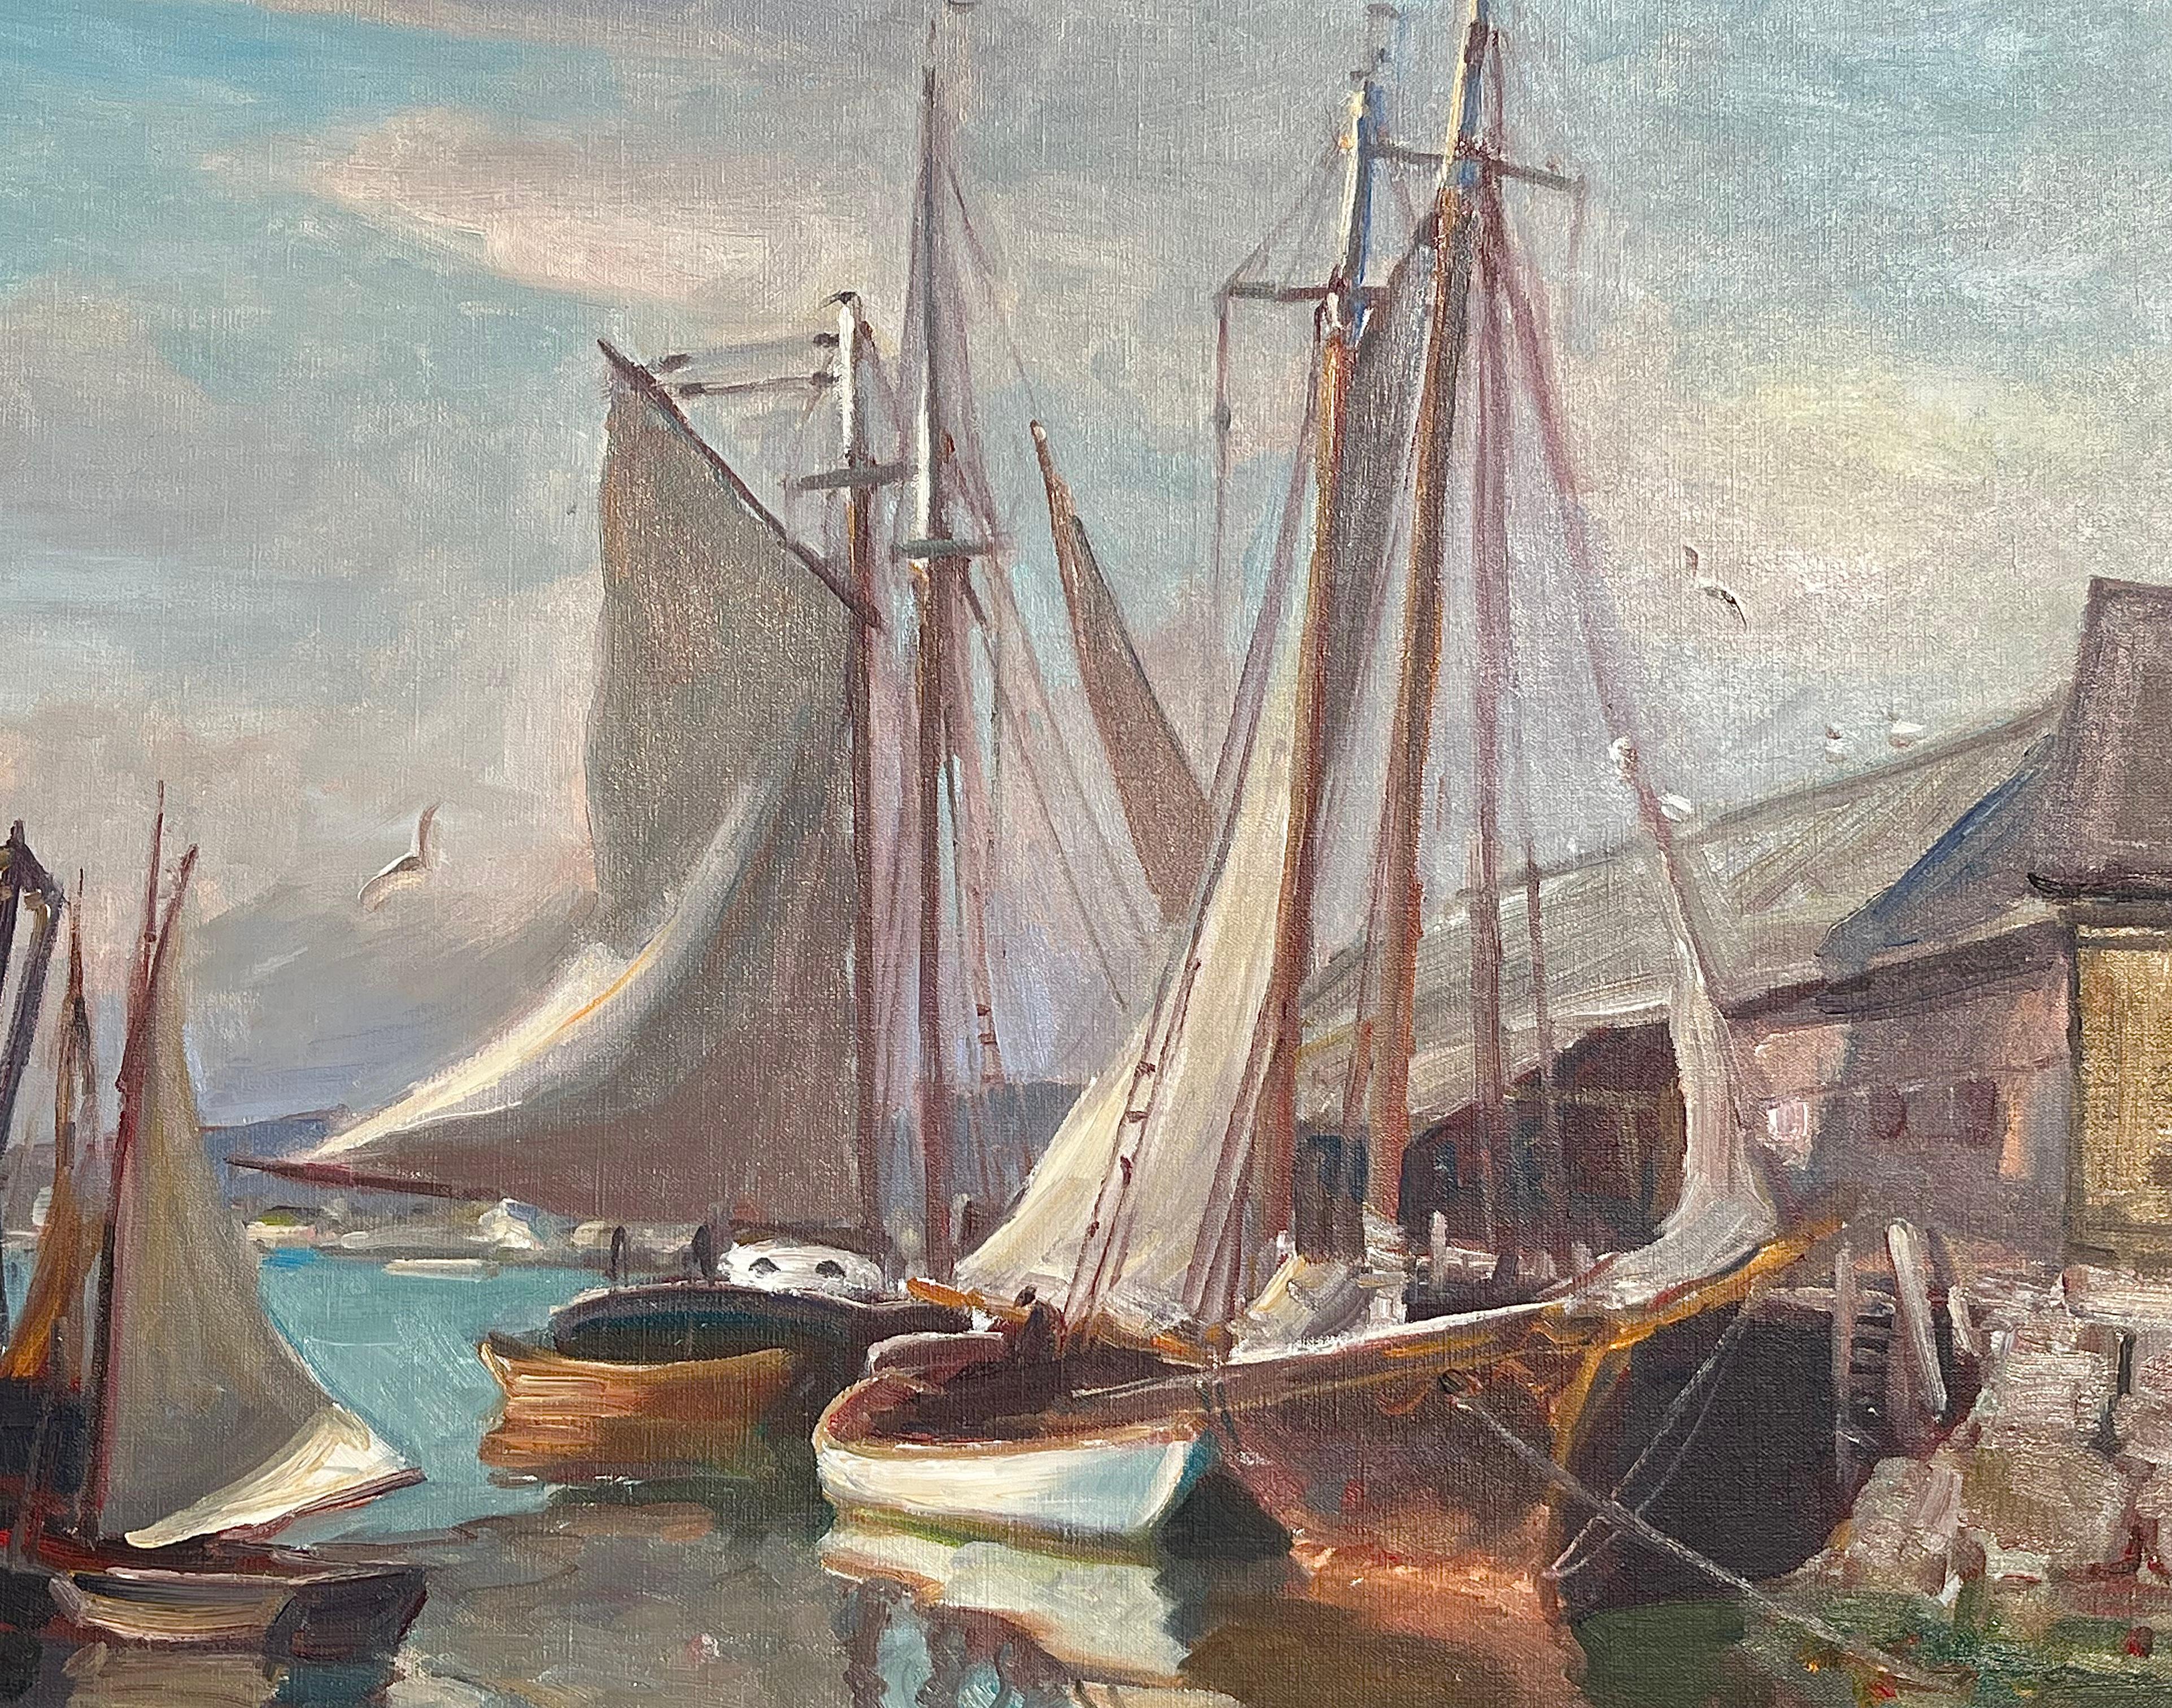 Hand-Painted Emile Albert Gruppe “Drying The Sails”